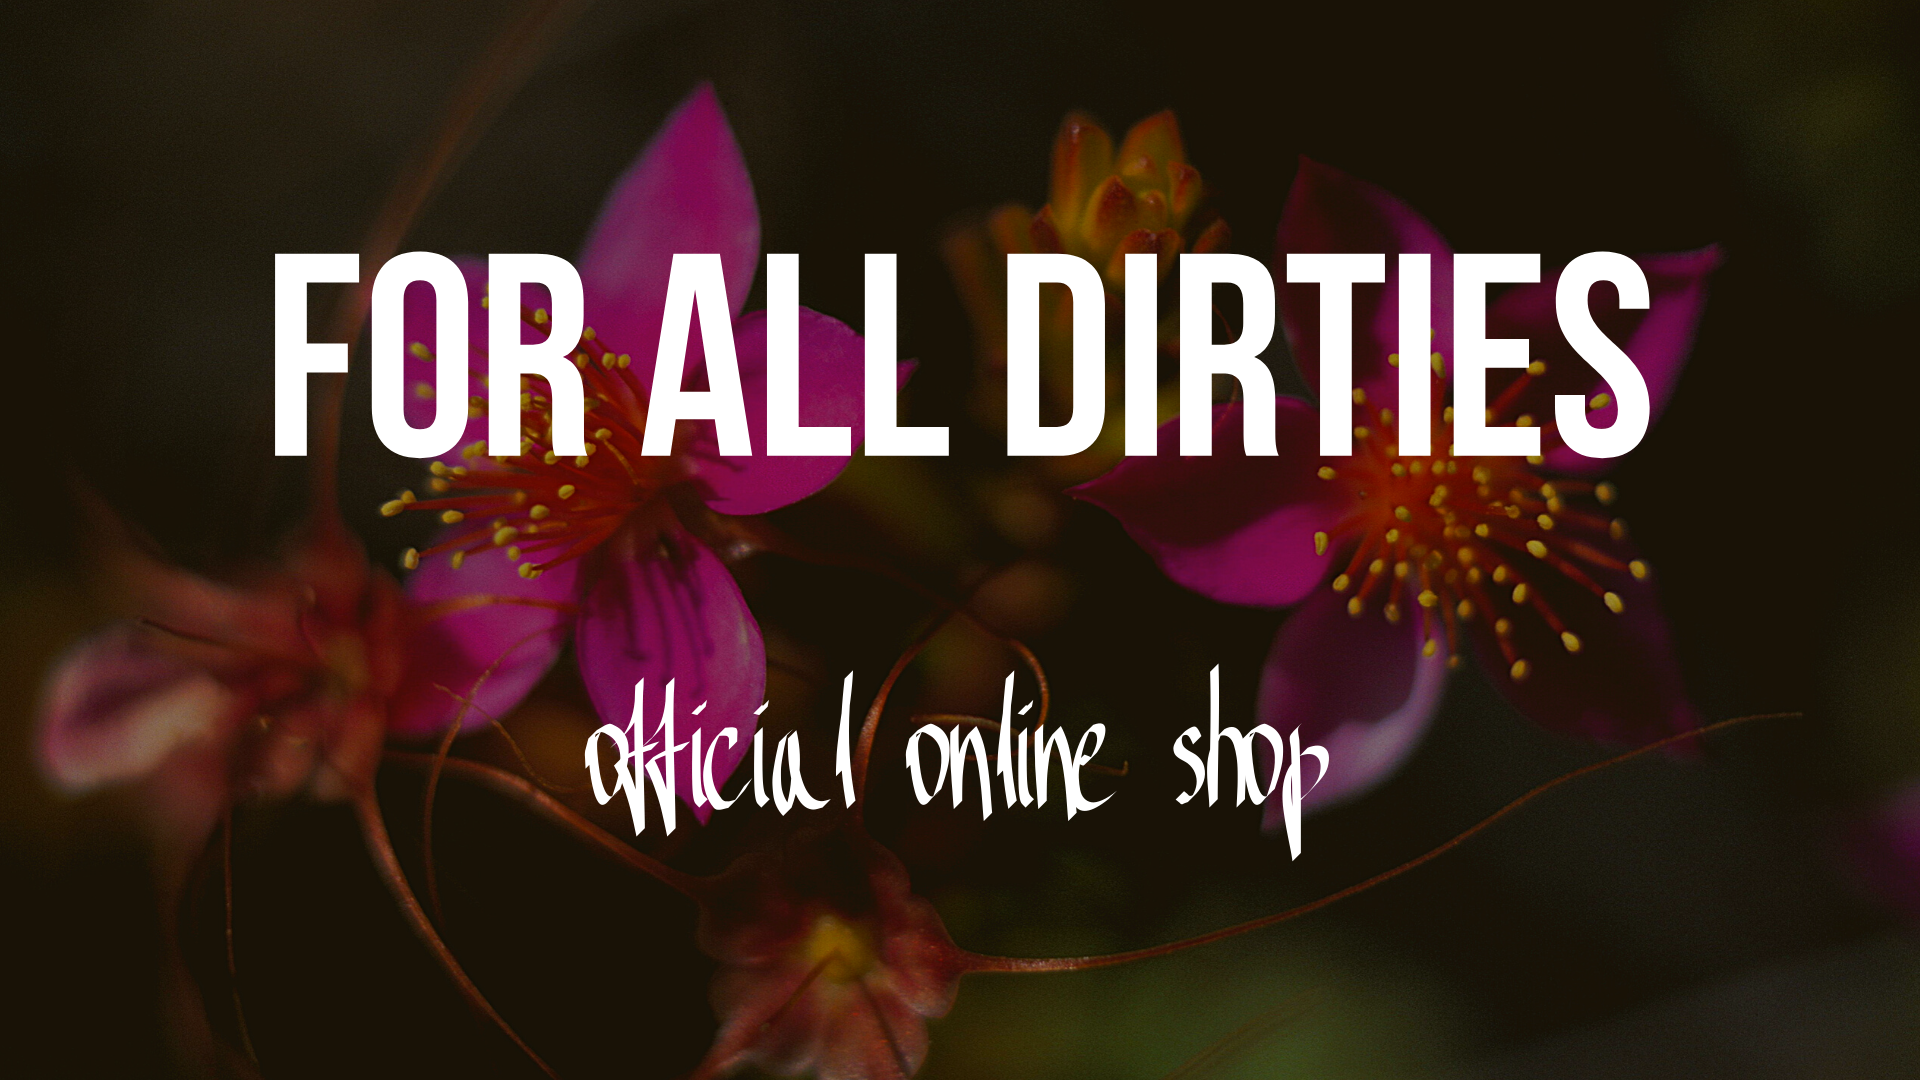 "for all dirties official online shop" 開店のごあいさつ